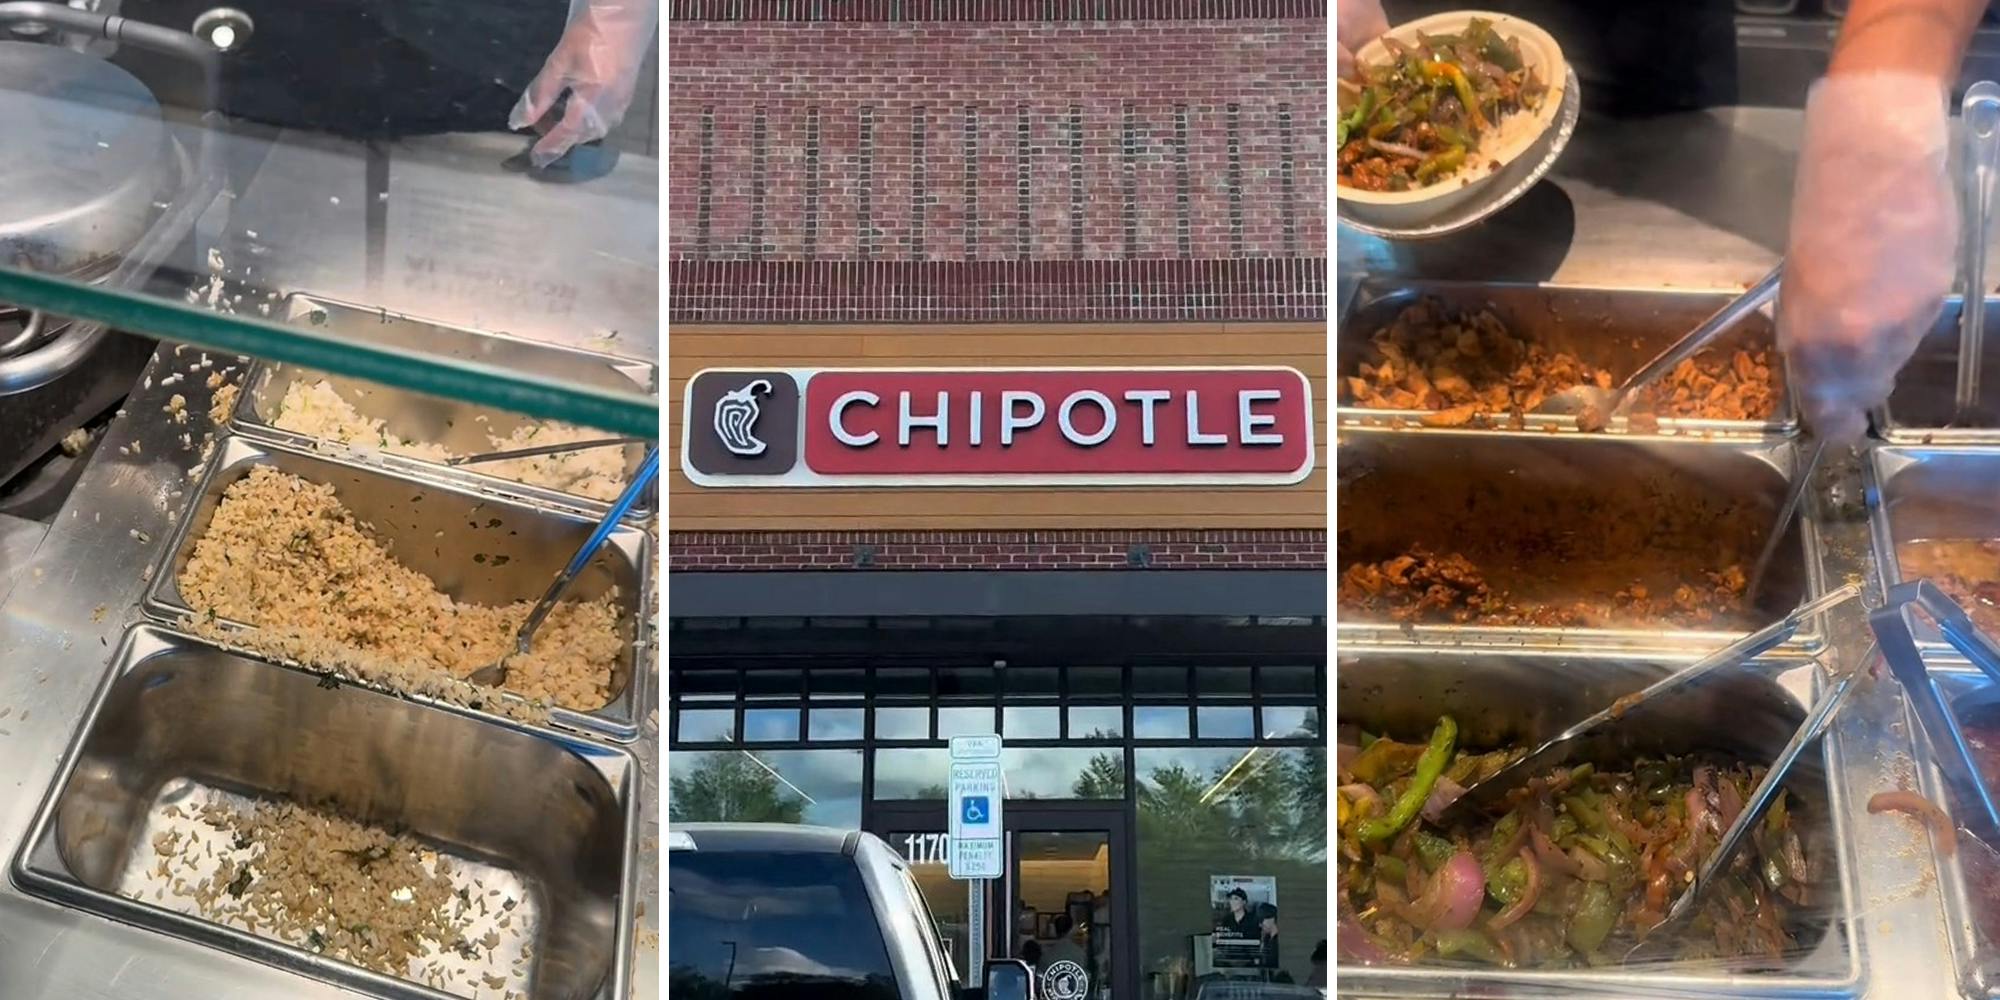 Customer tests theory that Chipotle is now giving out better scoops amid boycott